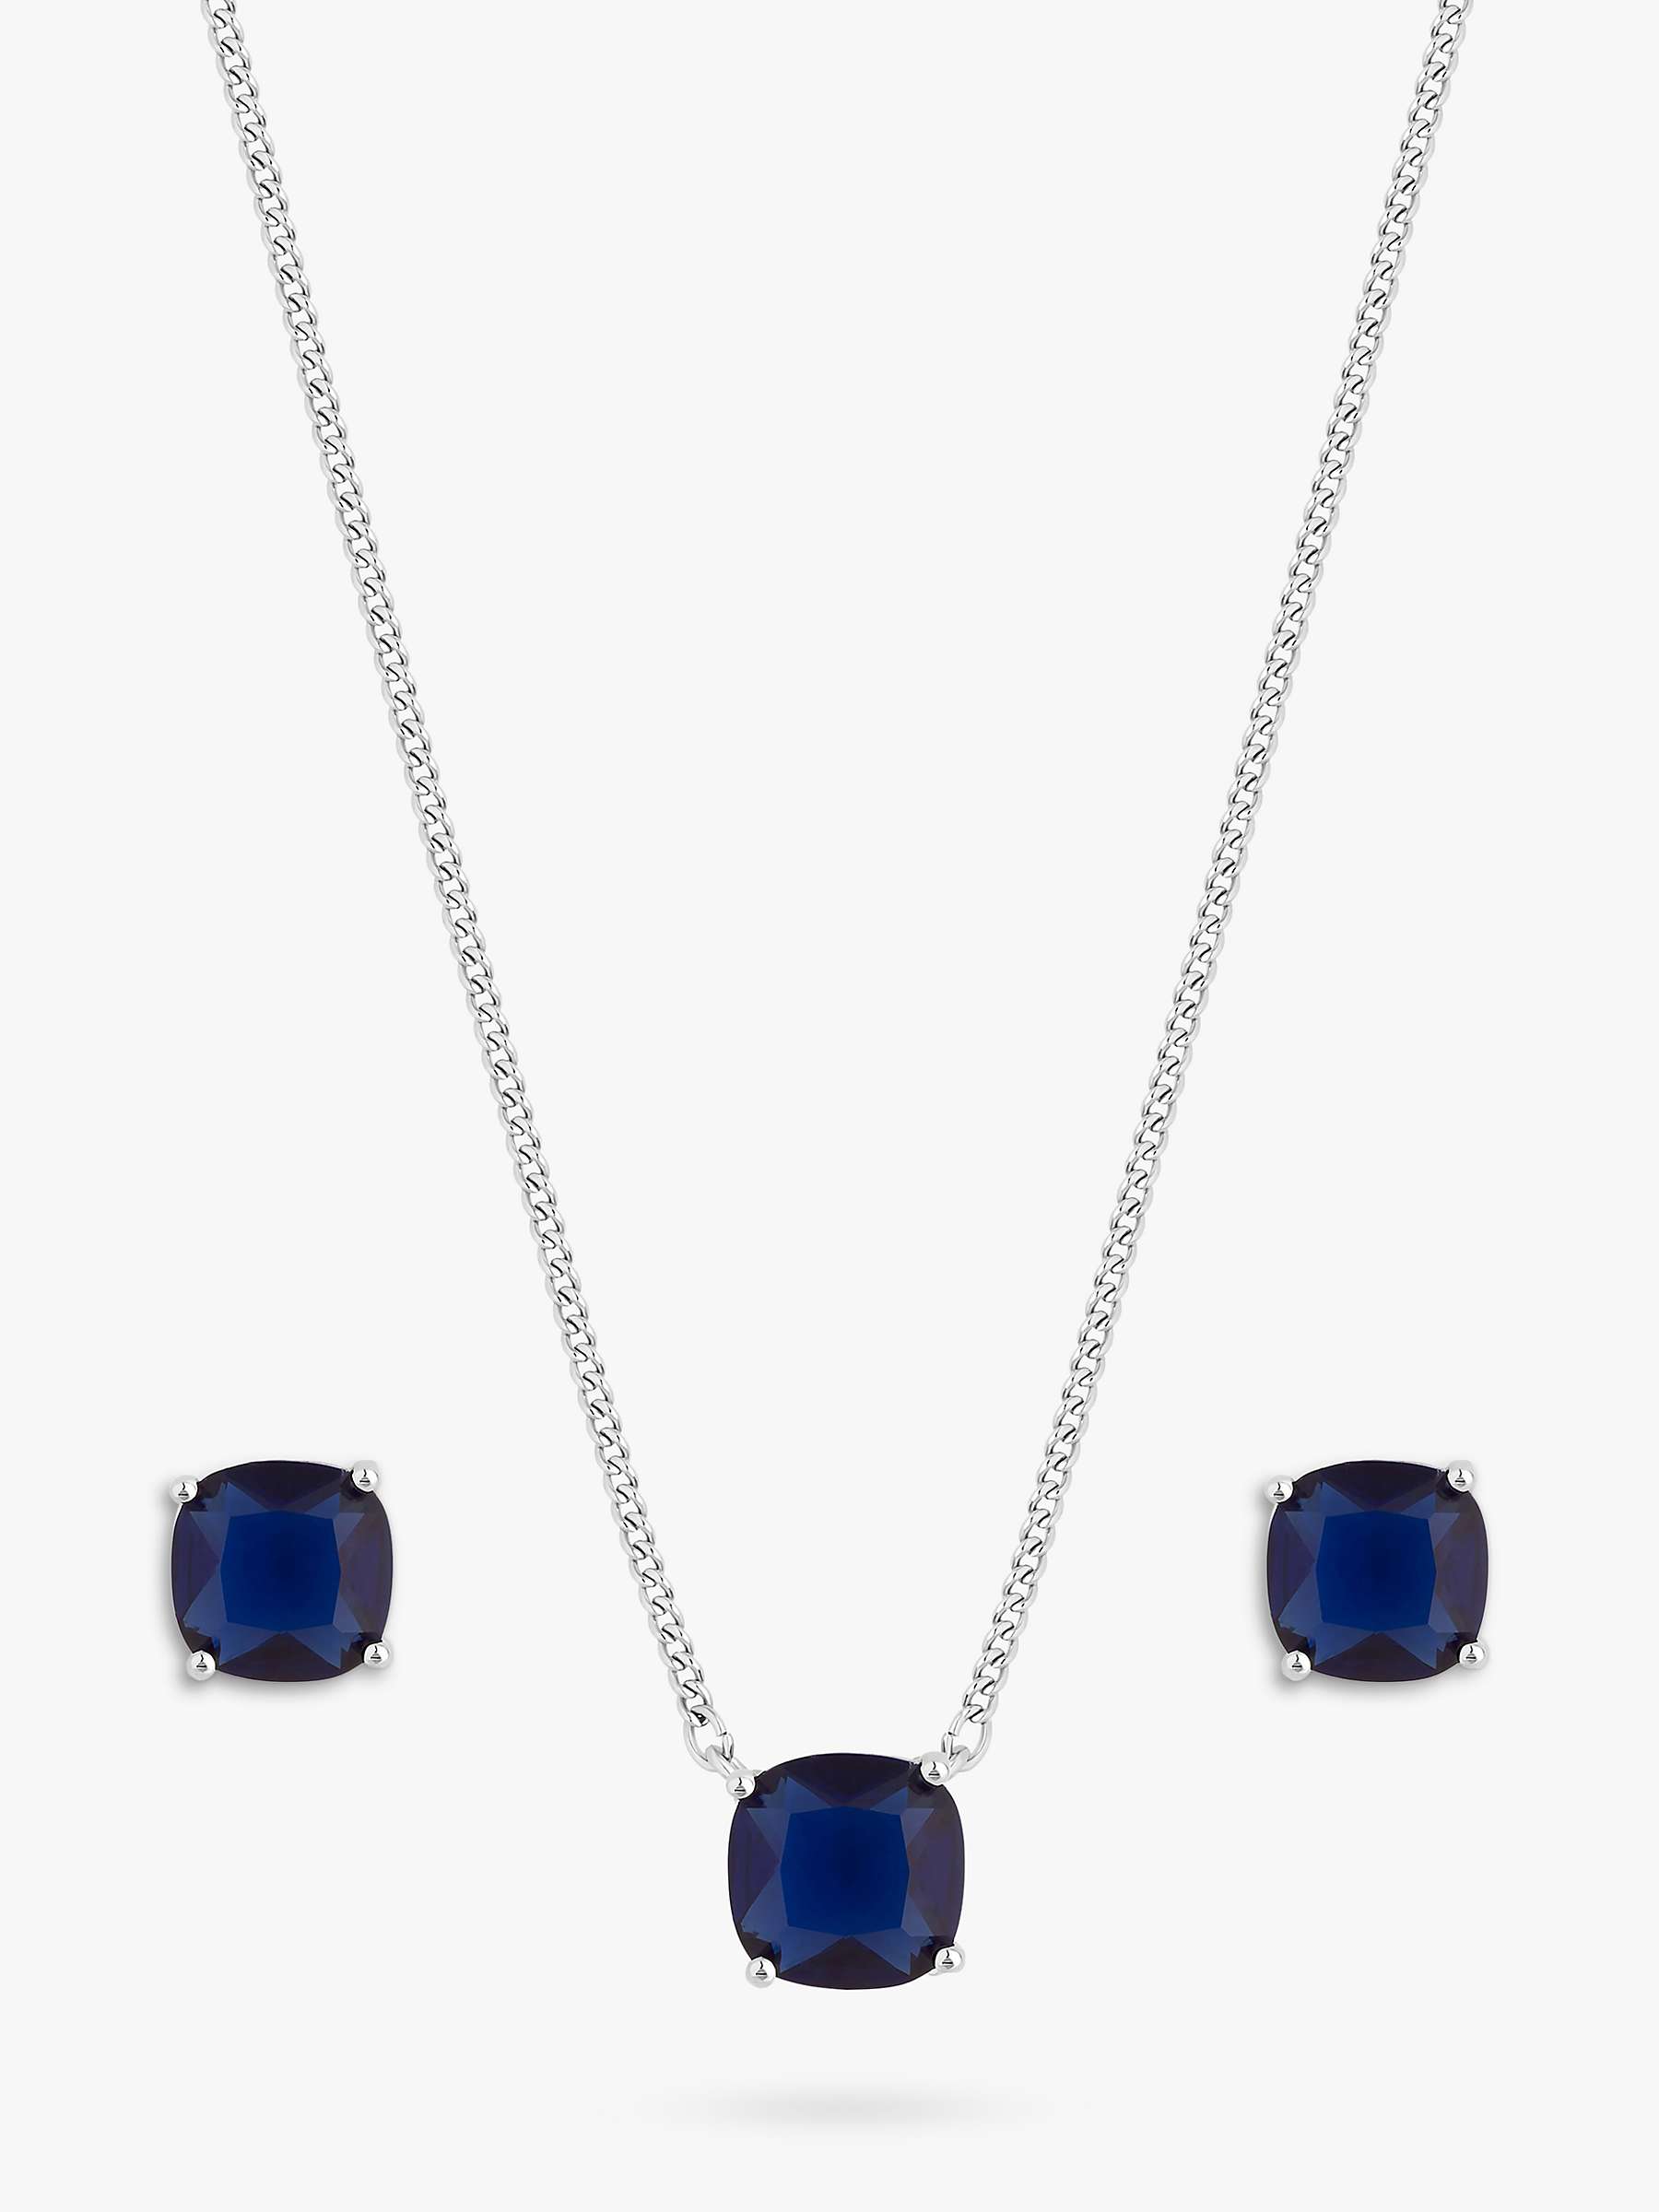 Buy Jon Richard Cubic Zirconia Open Stone Necklace and Earrings Set, Silver/Blue Online at johnlewis.com